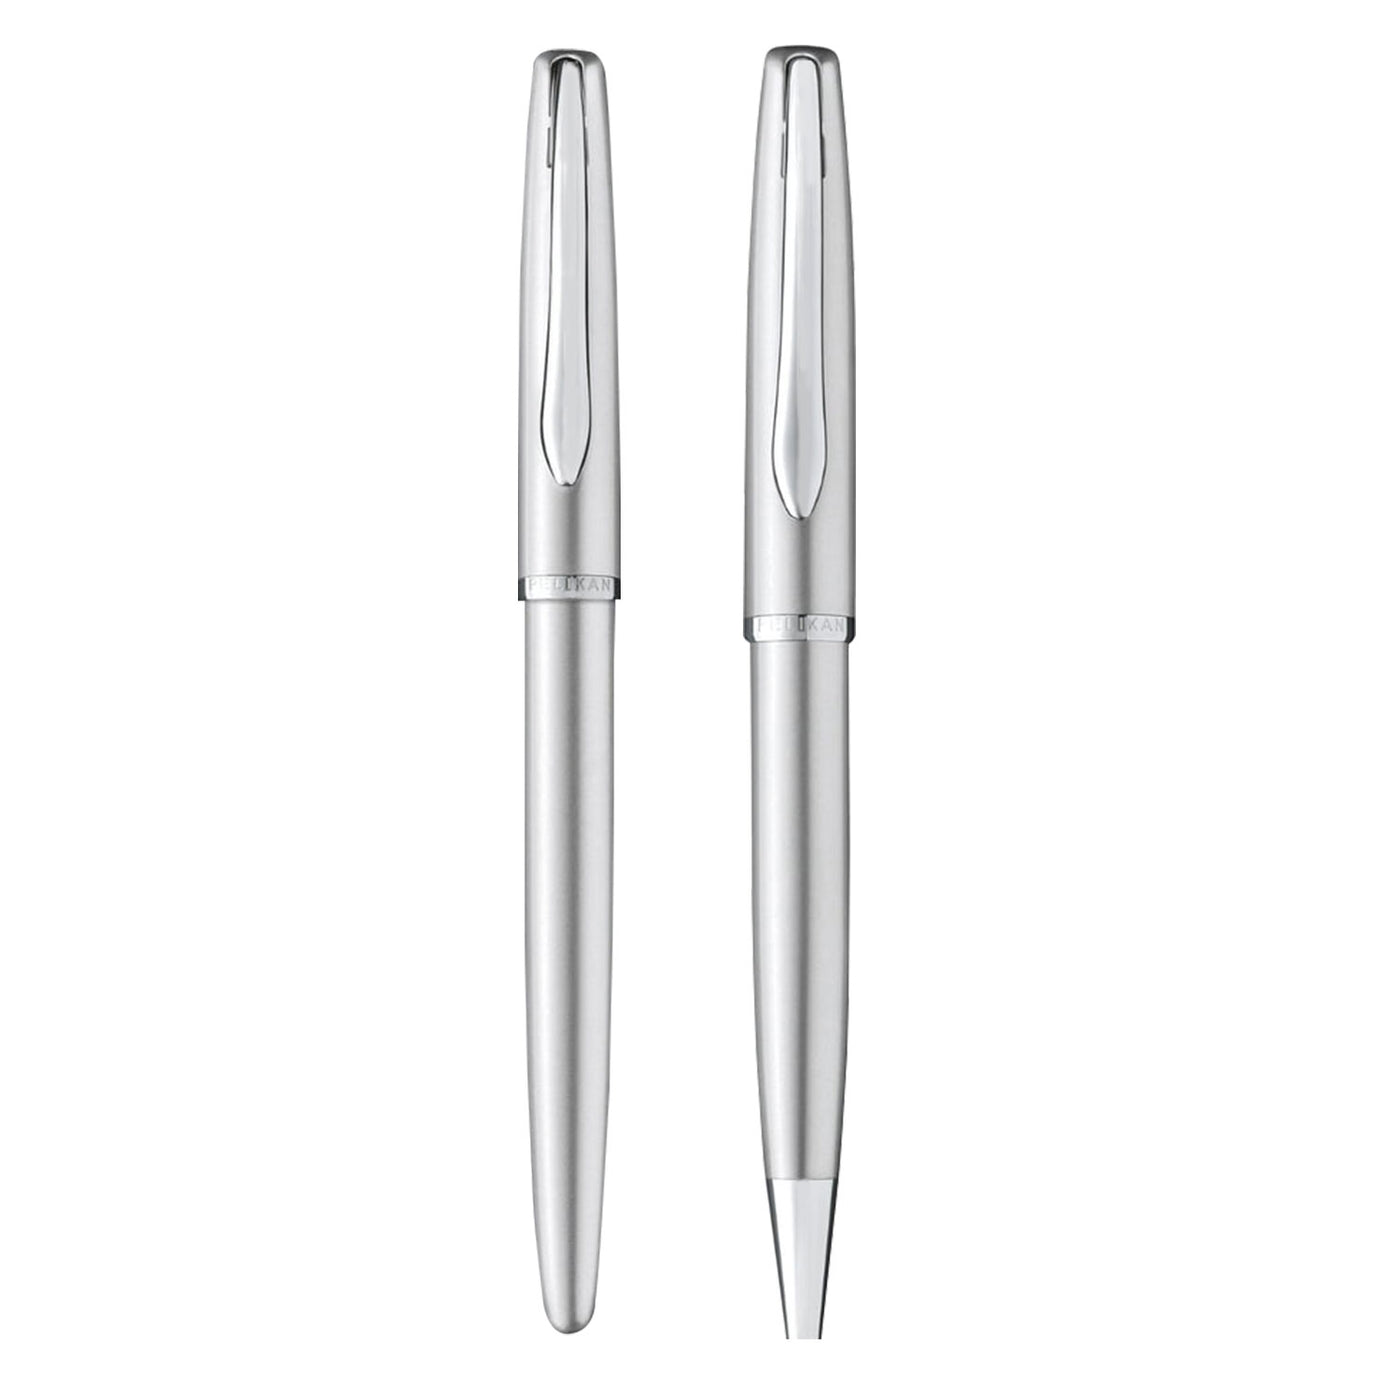 shree jewellers 999 Pure Silver Foil Coated Ball Point Pen for gift,  diwali, family, friends : Amazon.in: Office Products